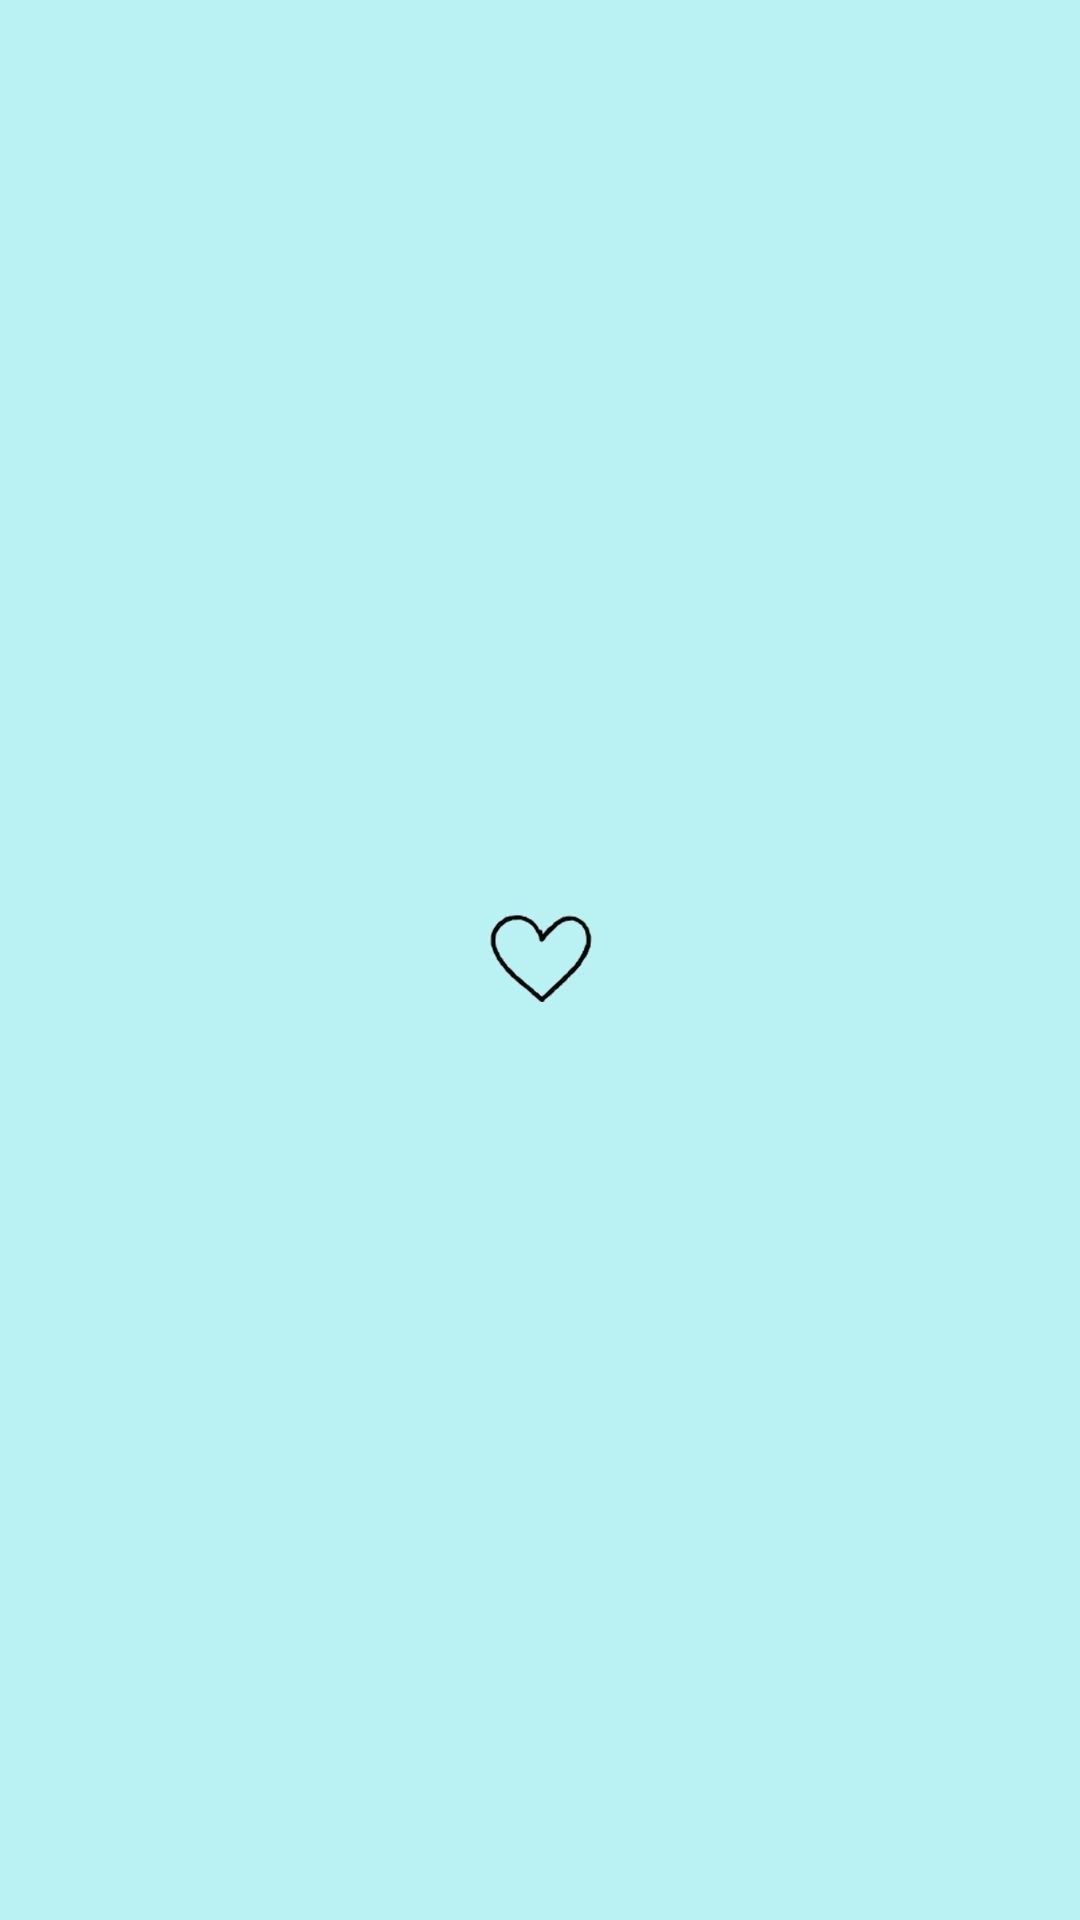 A blue background with a black heart in the middle - Aqua